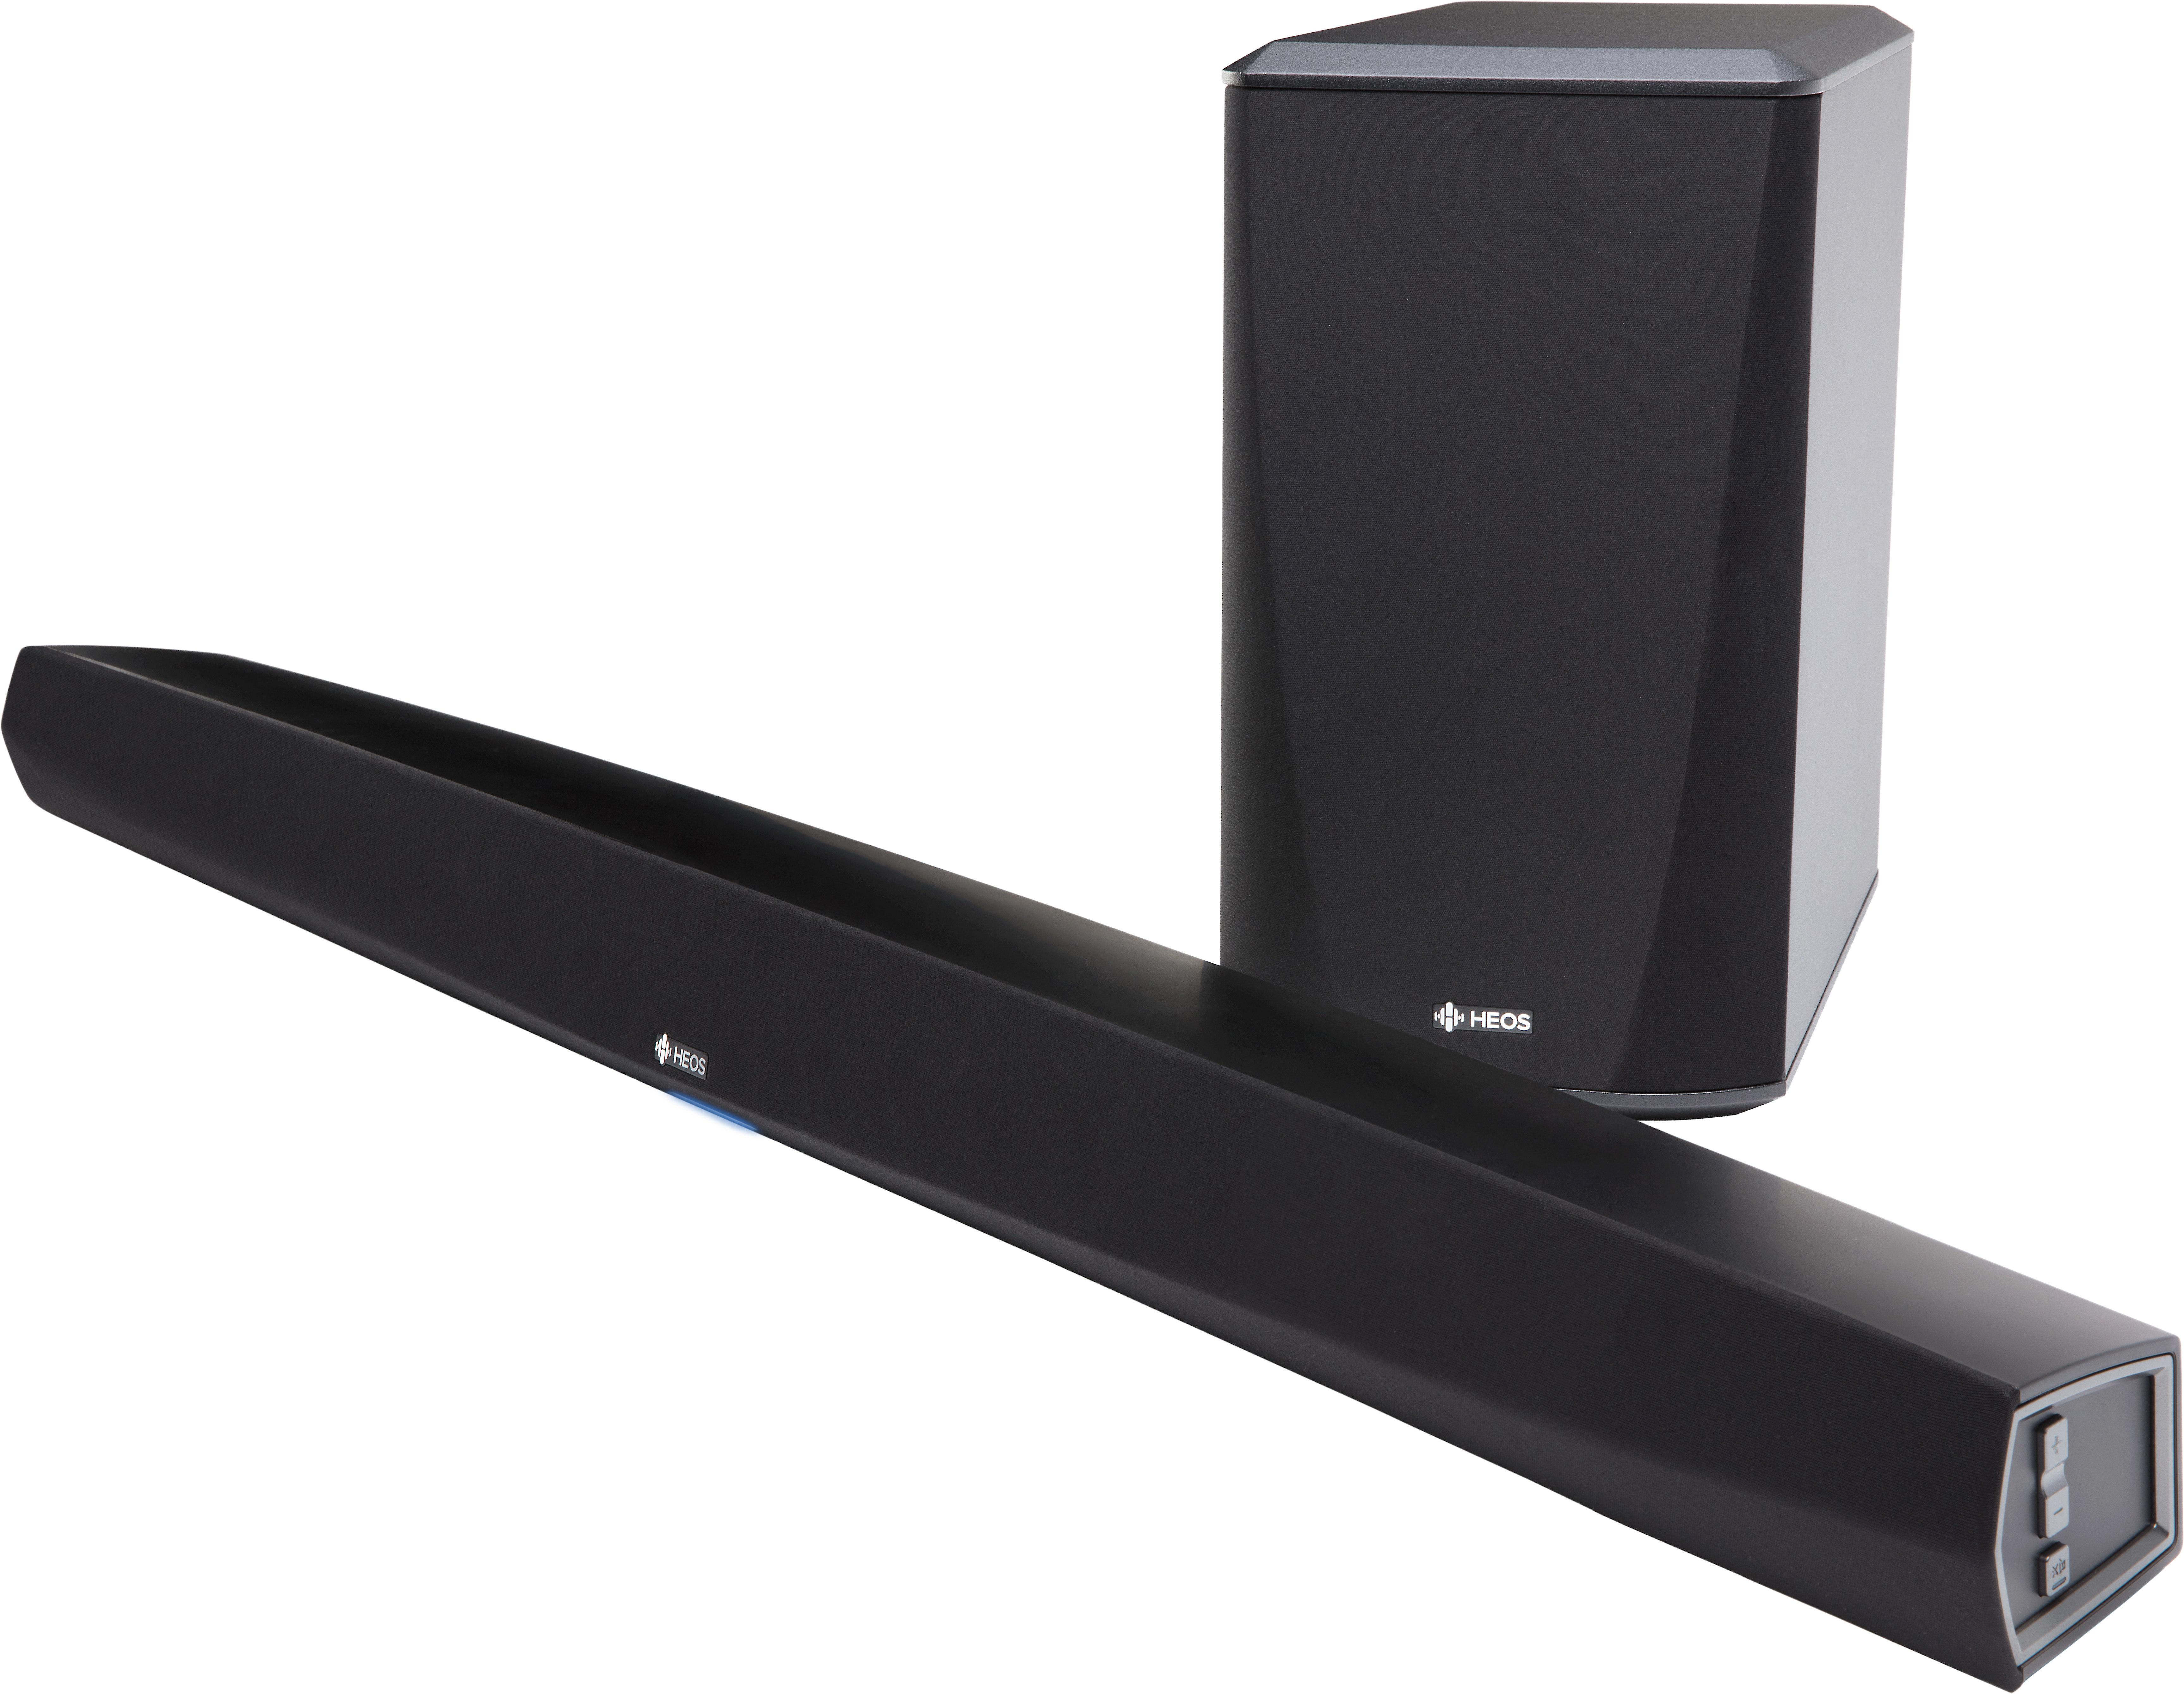 Customer Reviews: HEOS HS2 Powered 2.1-channel sound bar wireless subwoofer, and Bluetooth® at Crutchfield